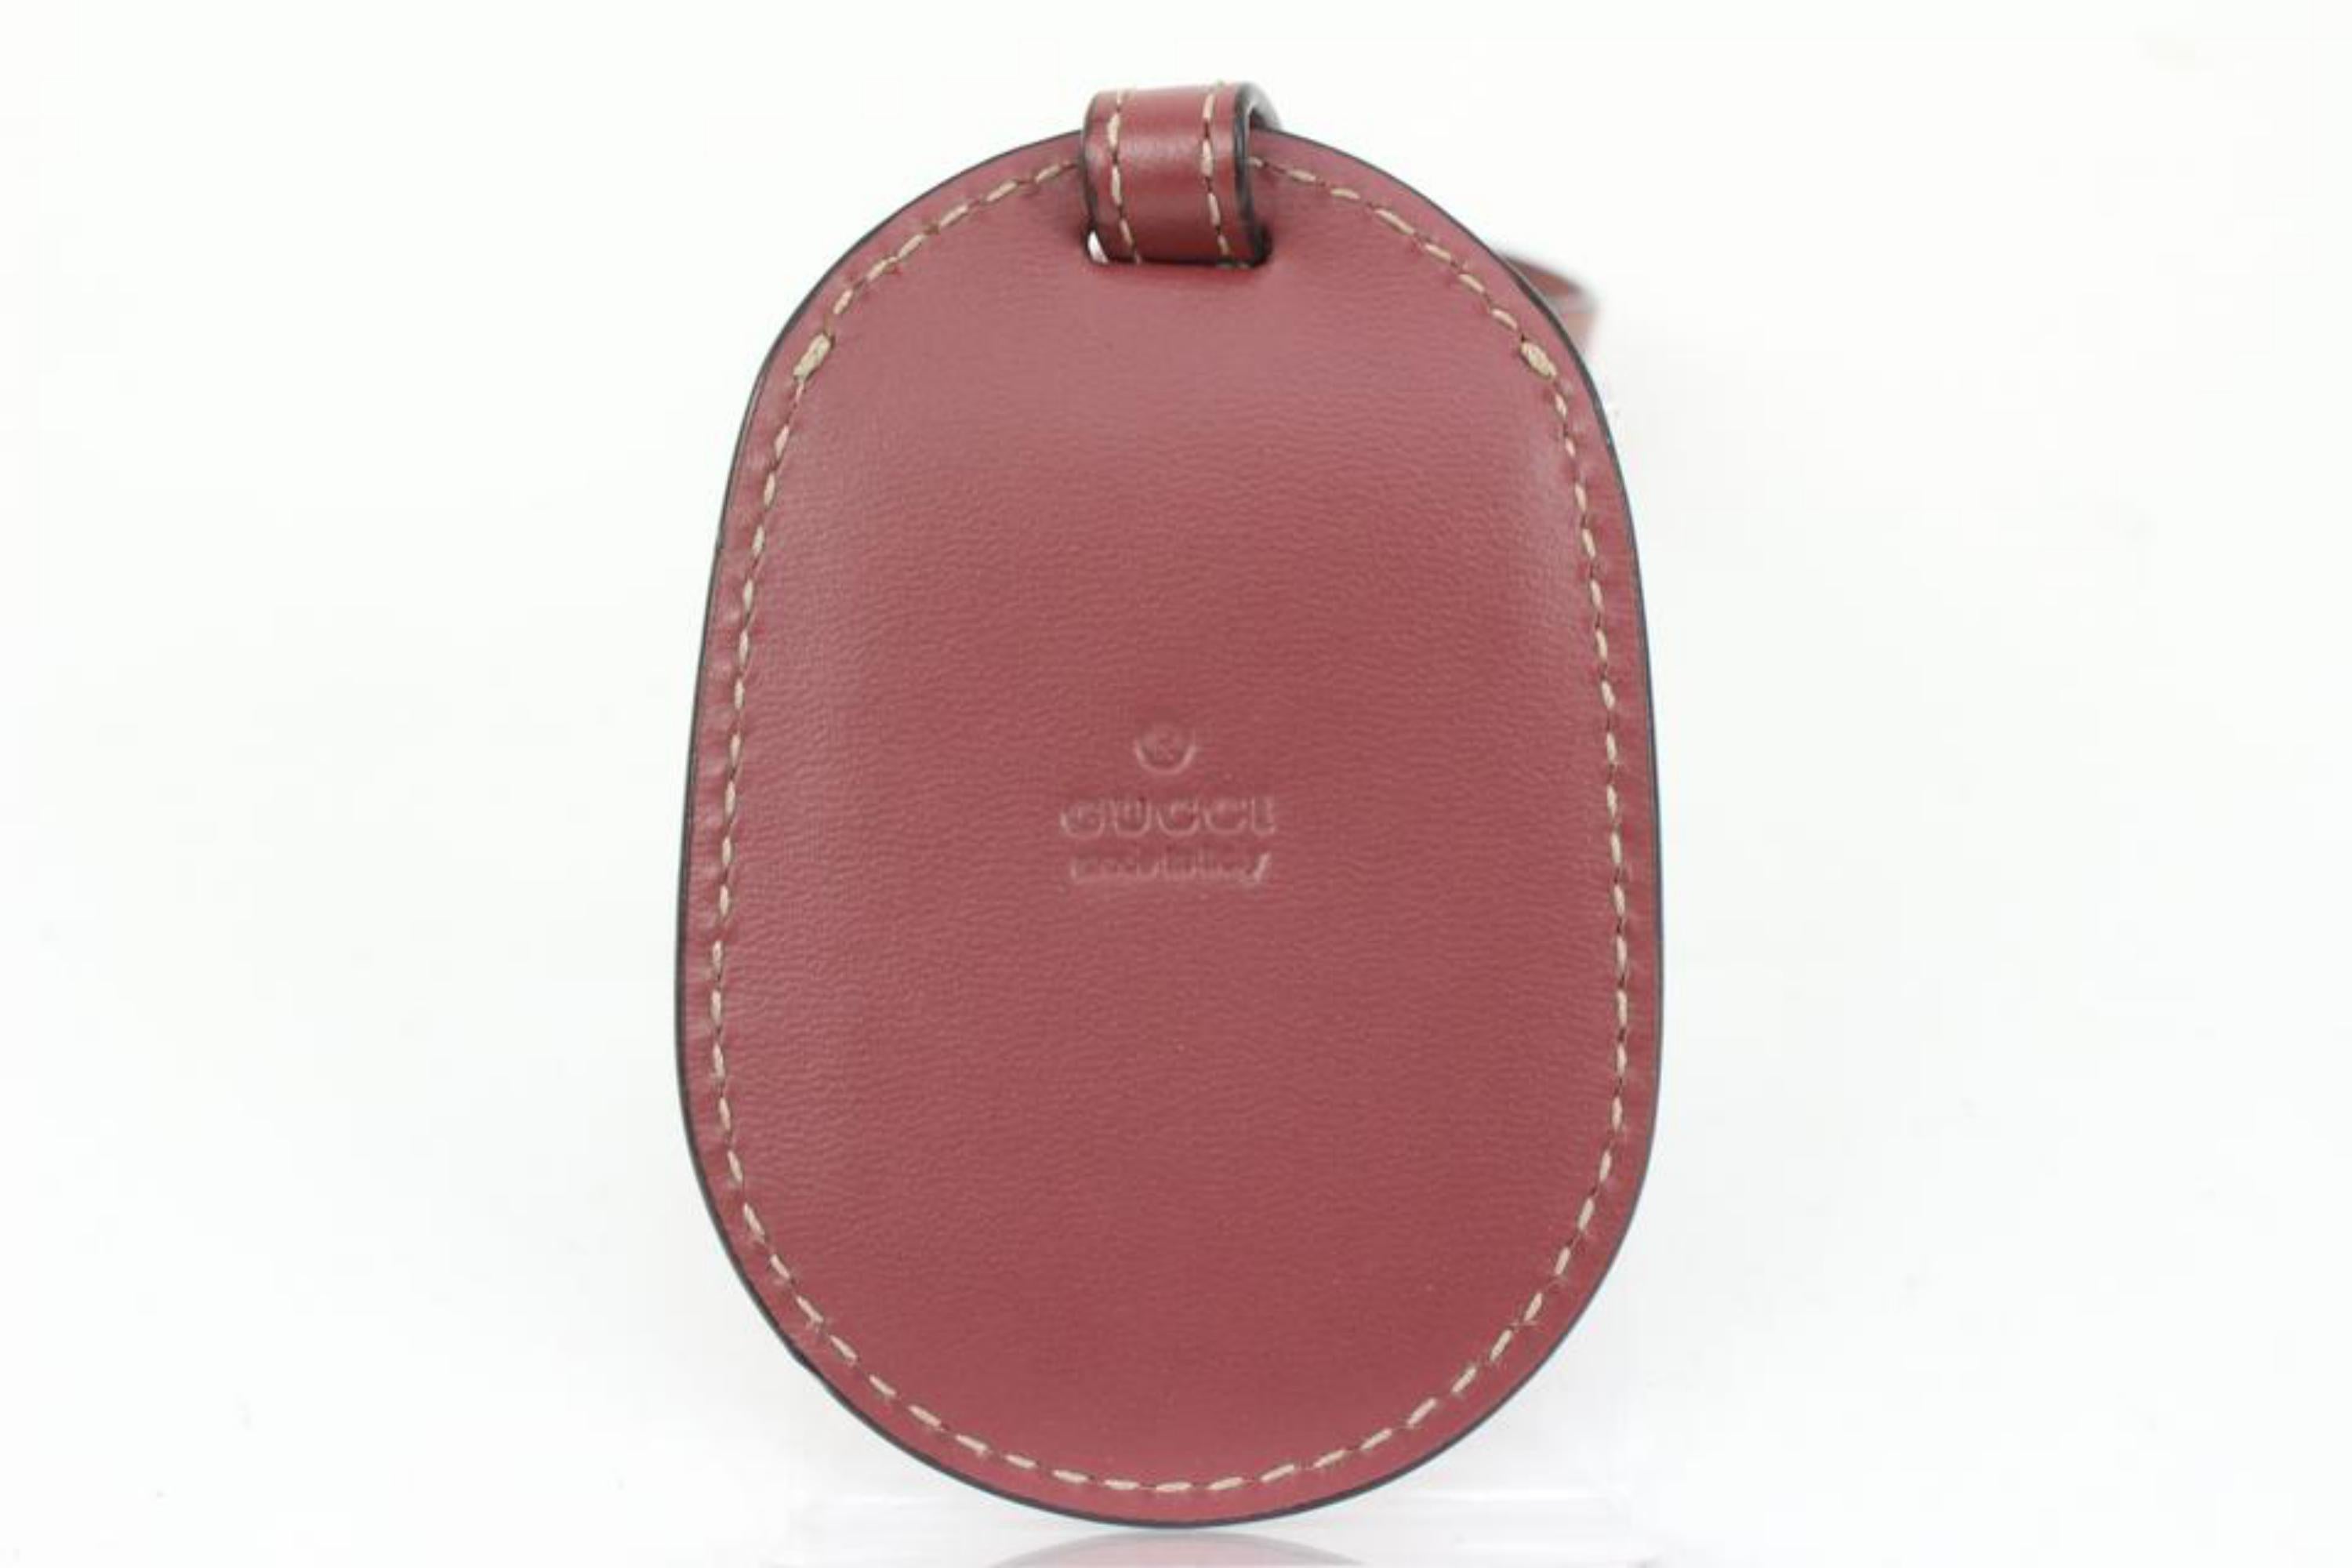 Gucci Mauve Clochette Luggage Tag from Reversible Supreme GG Tote s330g21 In Excellent Condition For Sale In Dix hills, NY